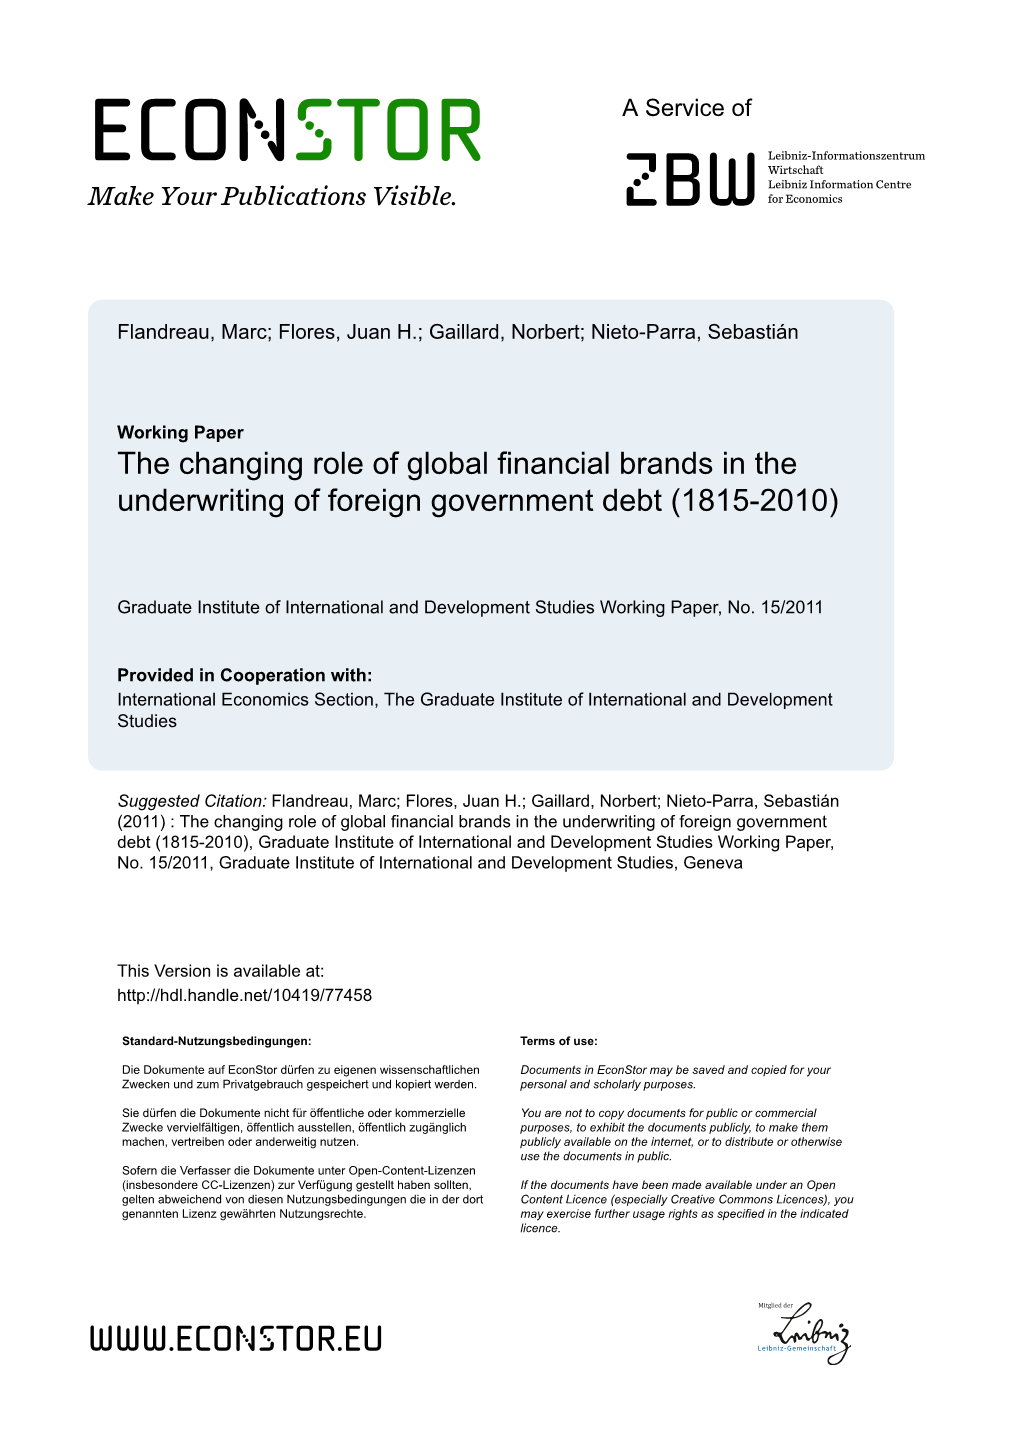 The Changing Role of Global Financial Brands in the Underwriting of Foreign Government Debt (1815-2010)